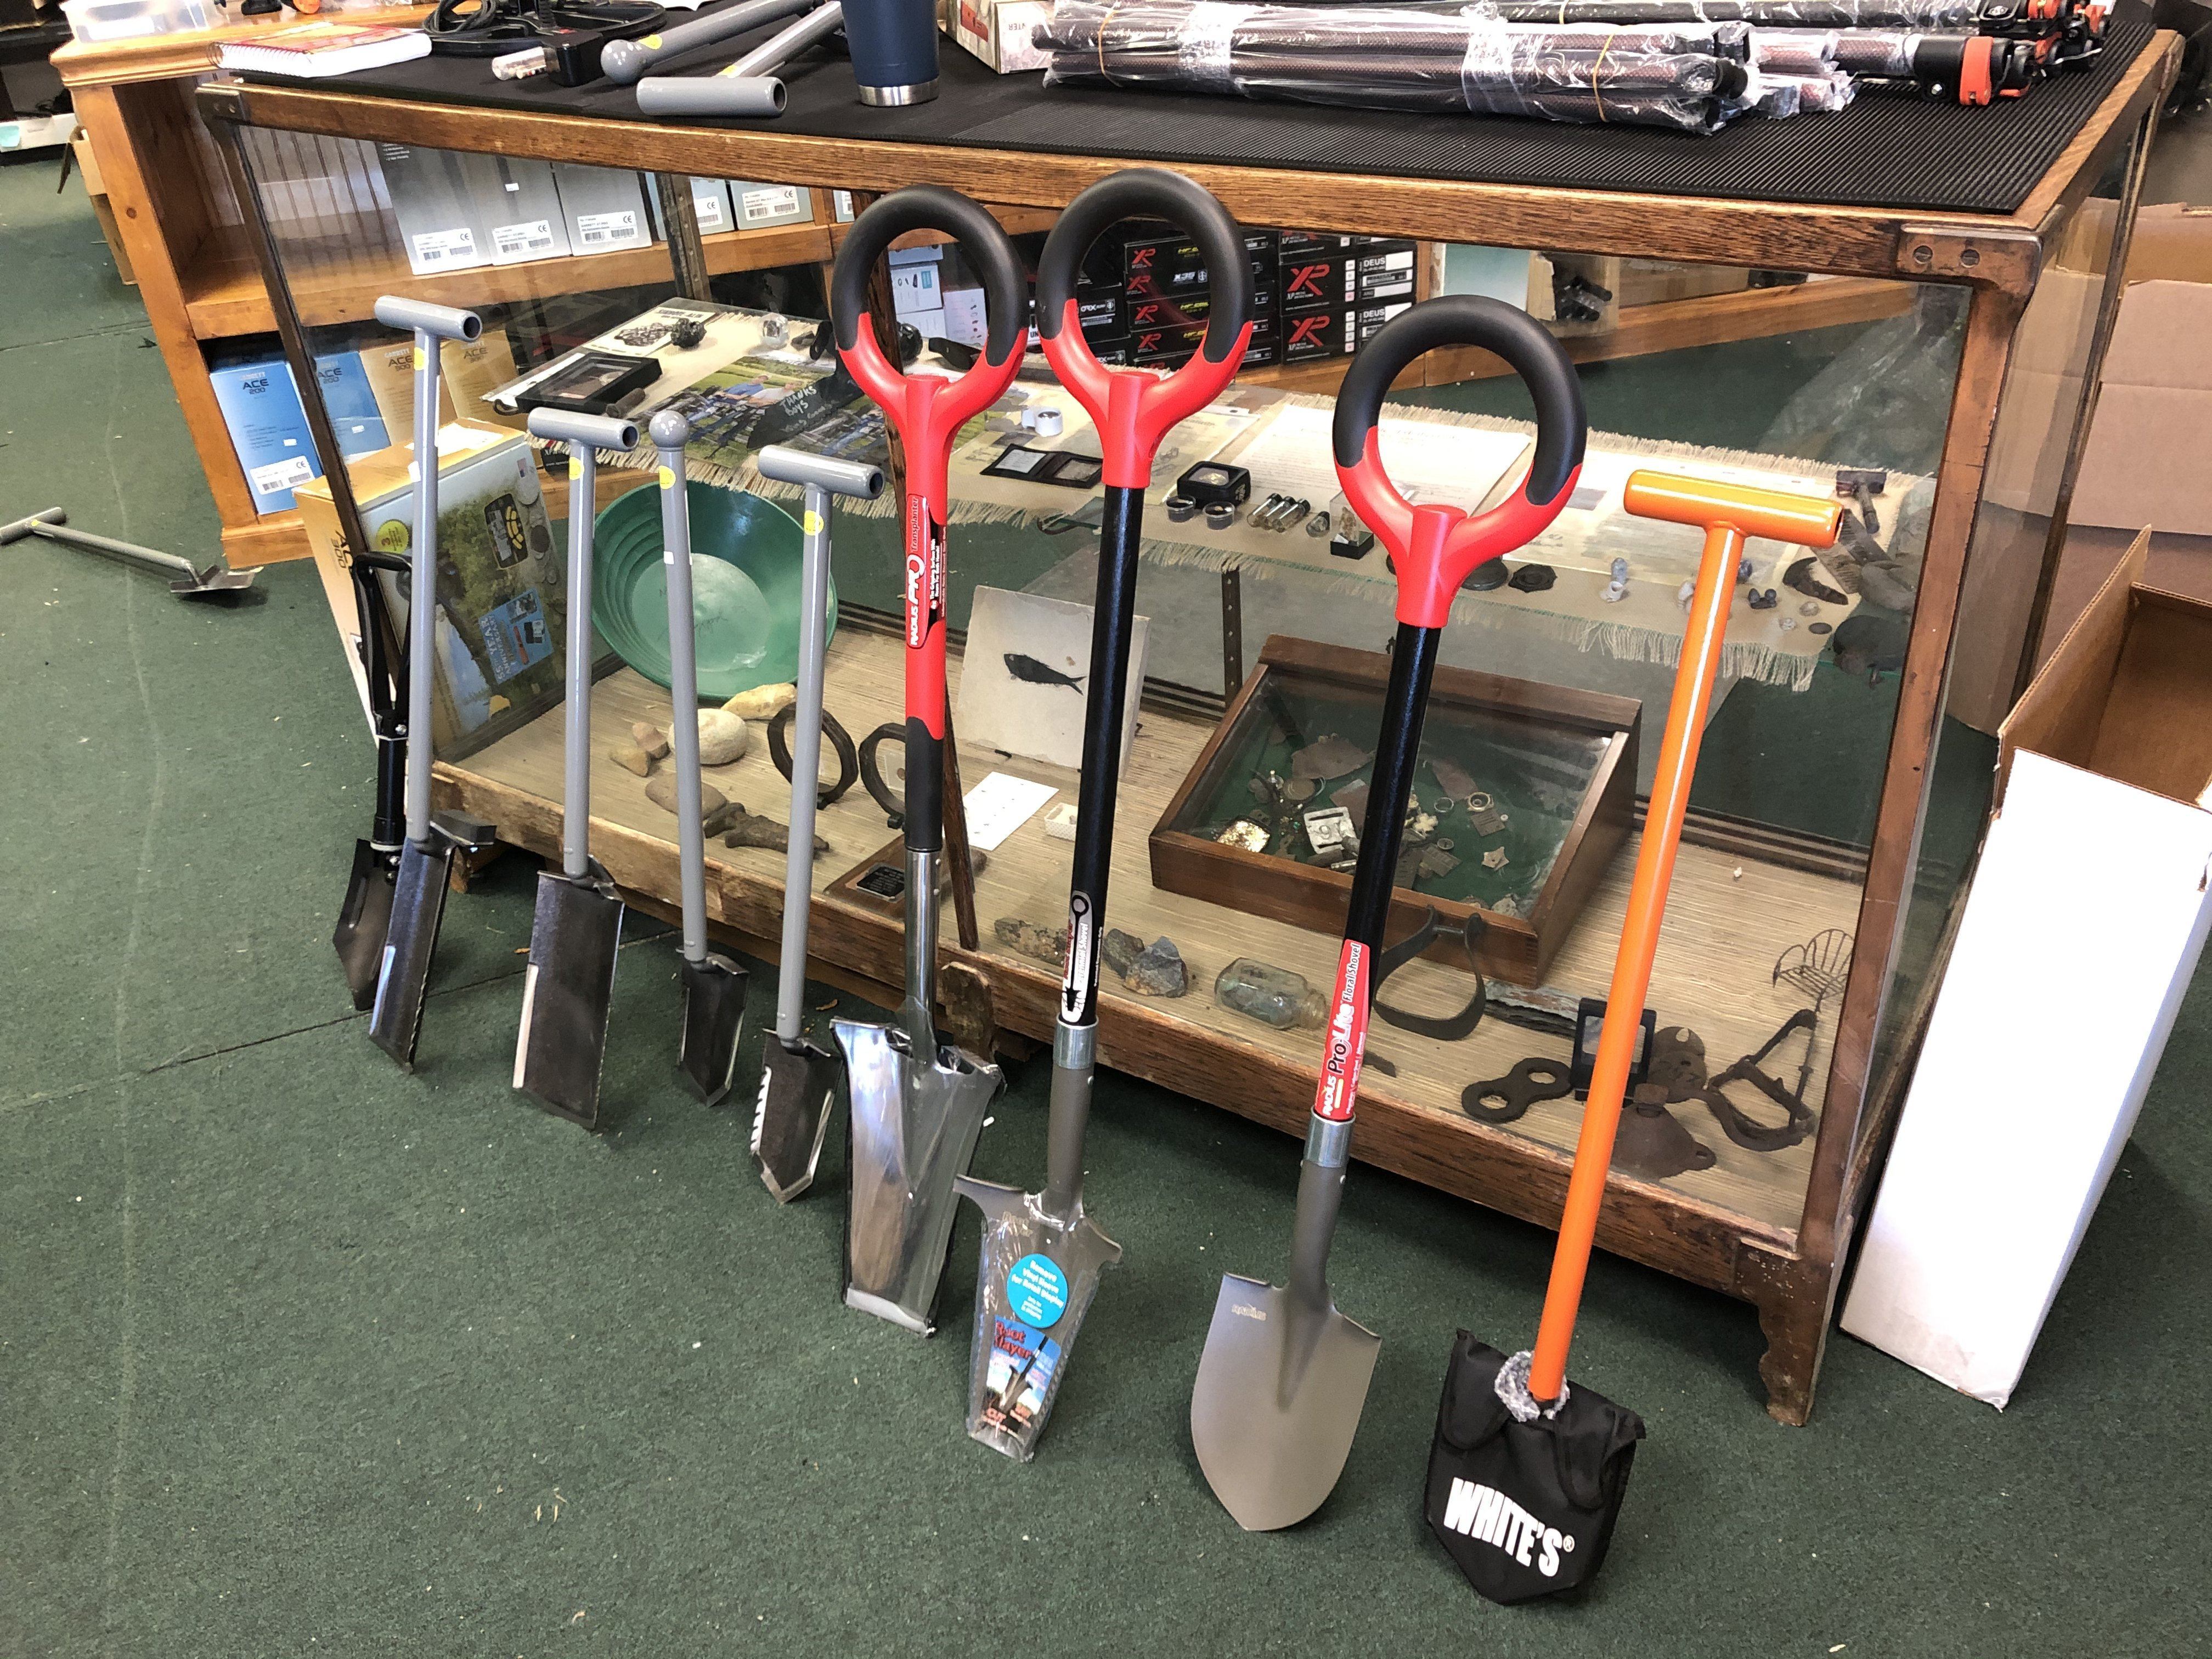 Top 5 Recommended Shovels for Metal Detecting